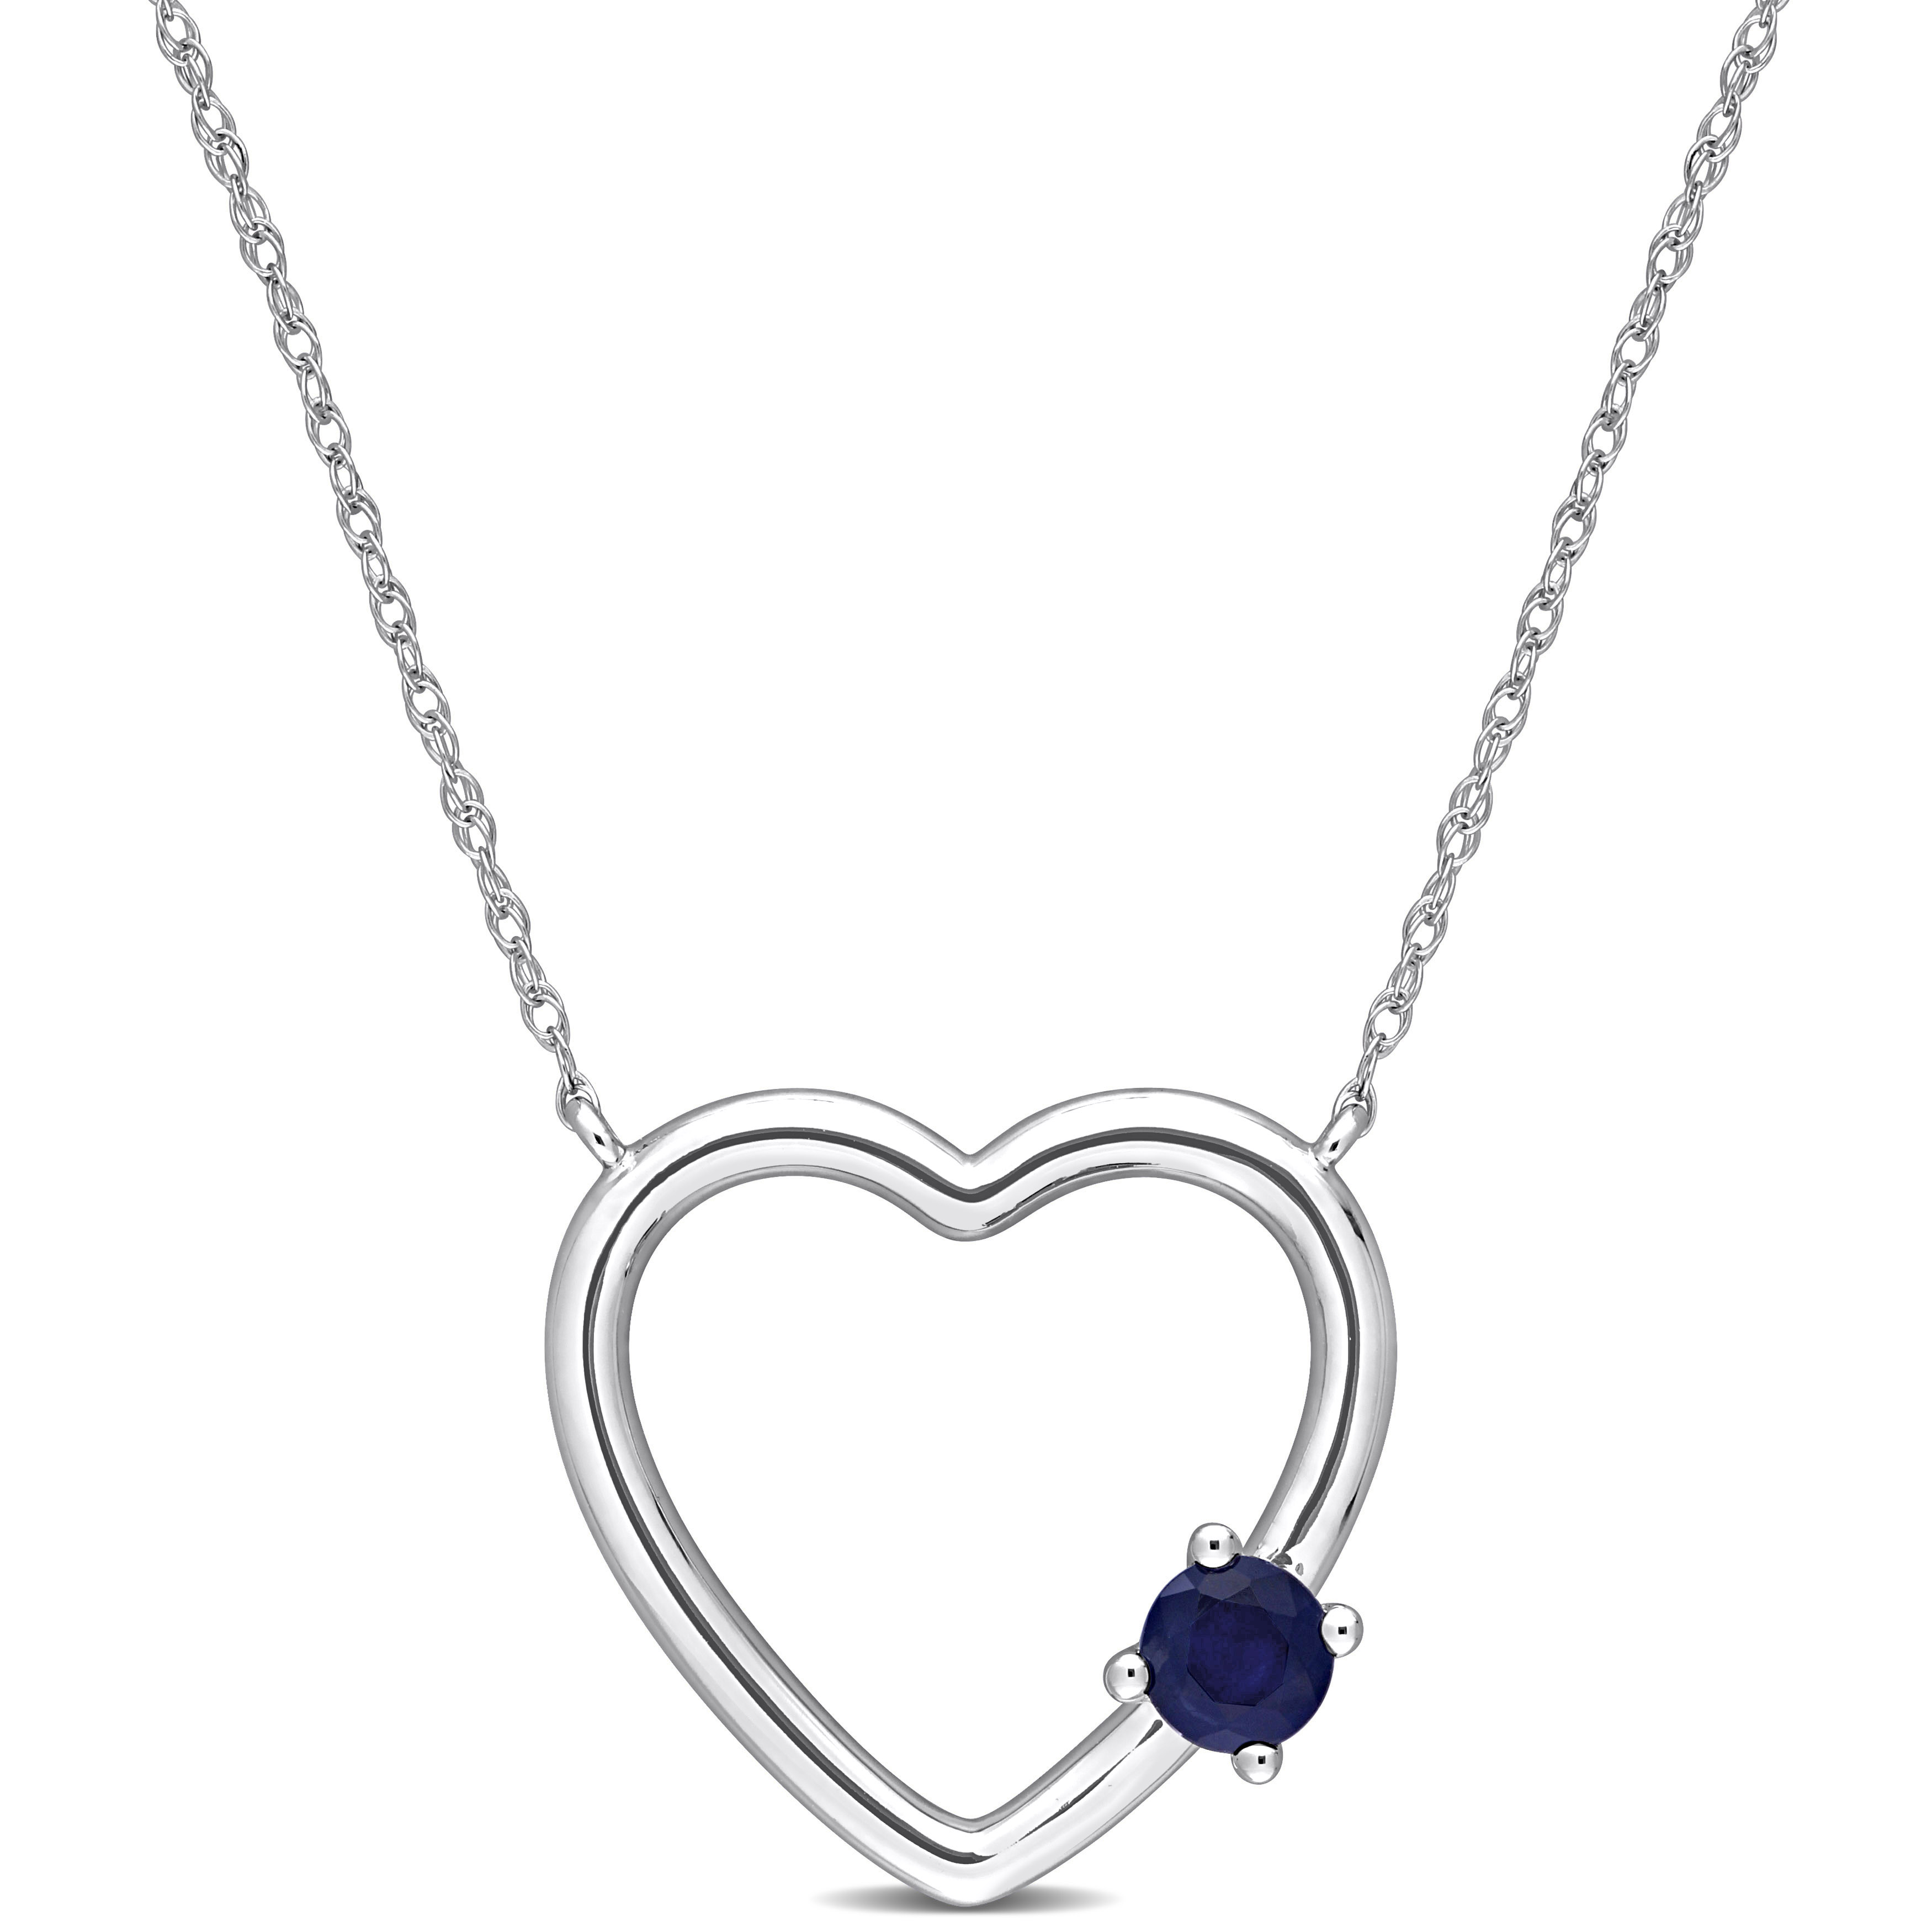 1/3 CT TGW Sapphire Open Heart Pendant with Chain in 10k White Gold